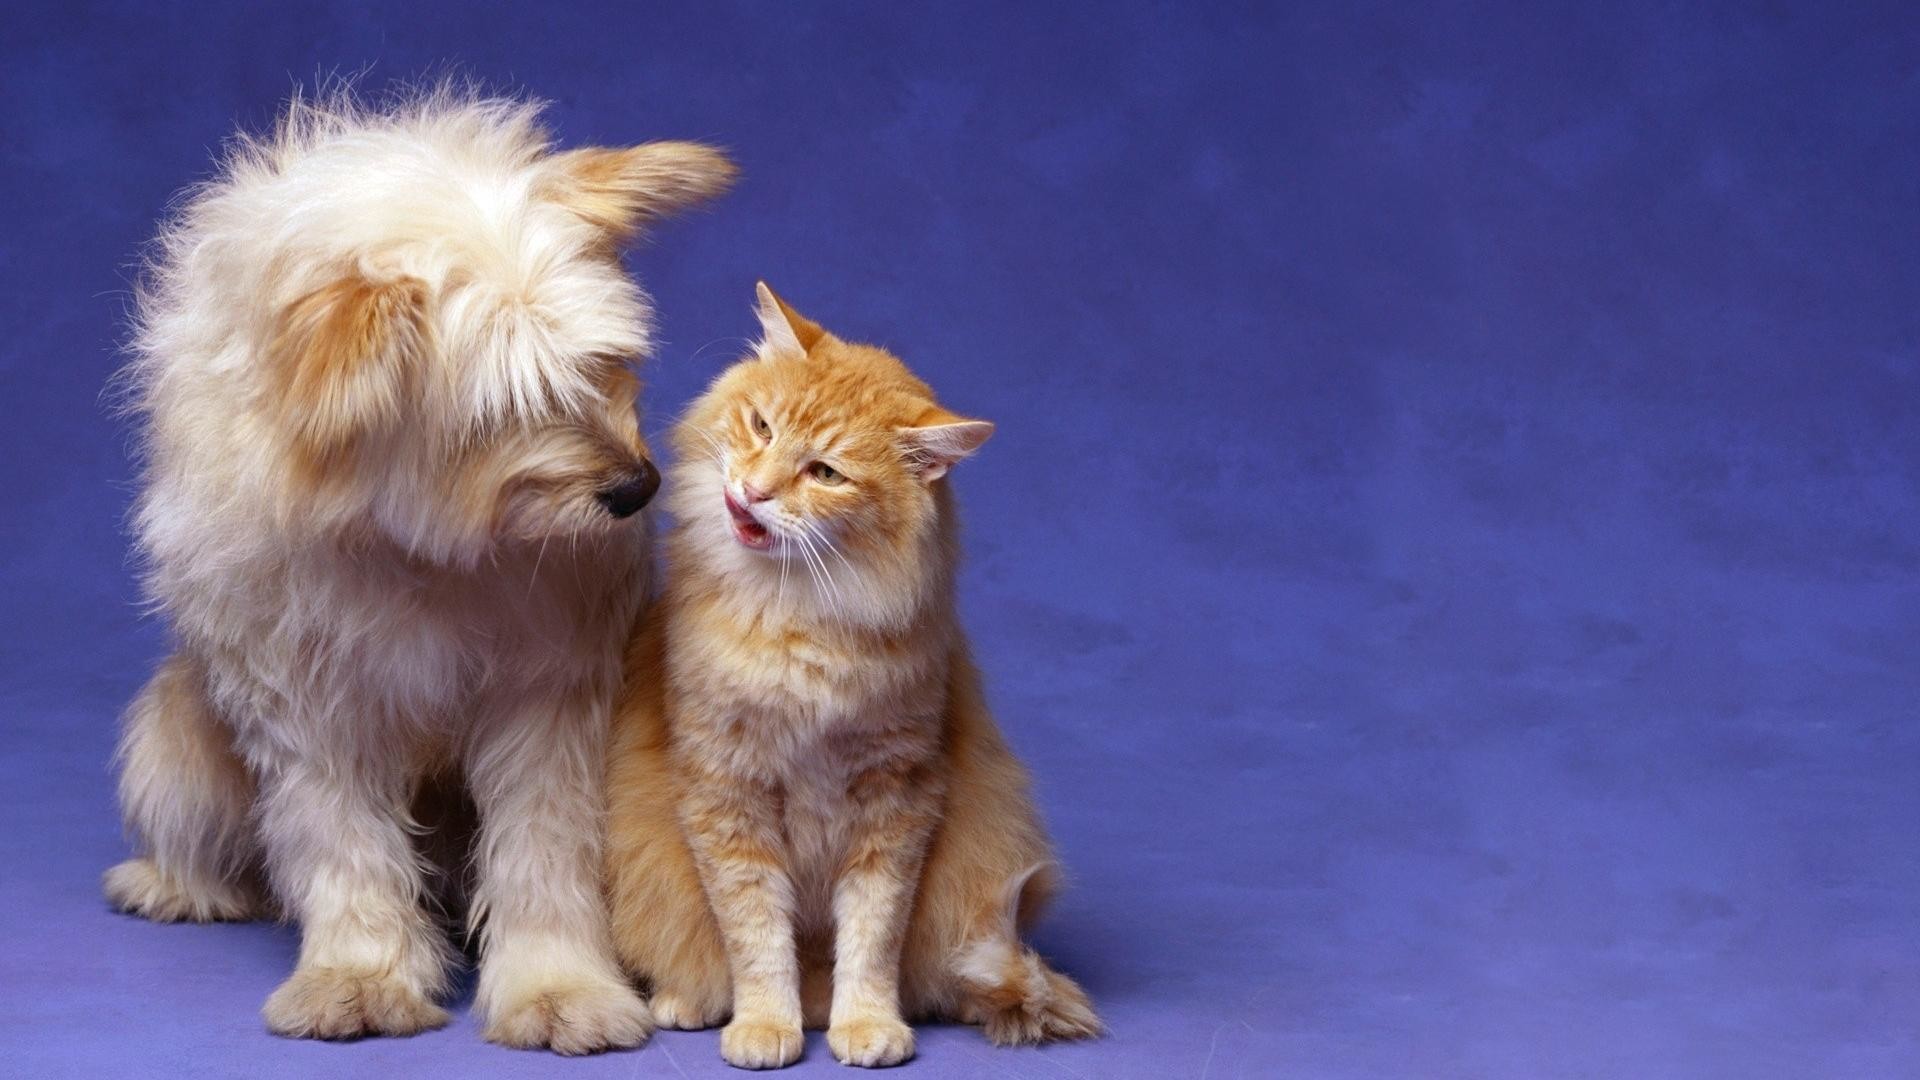 1920x1080 Cat And Dog Wallpapers Wallpaper Cave